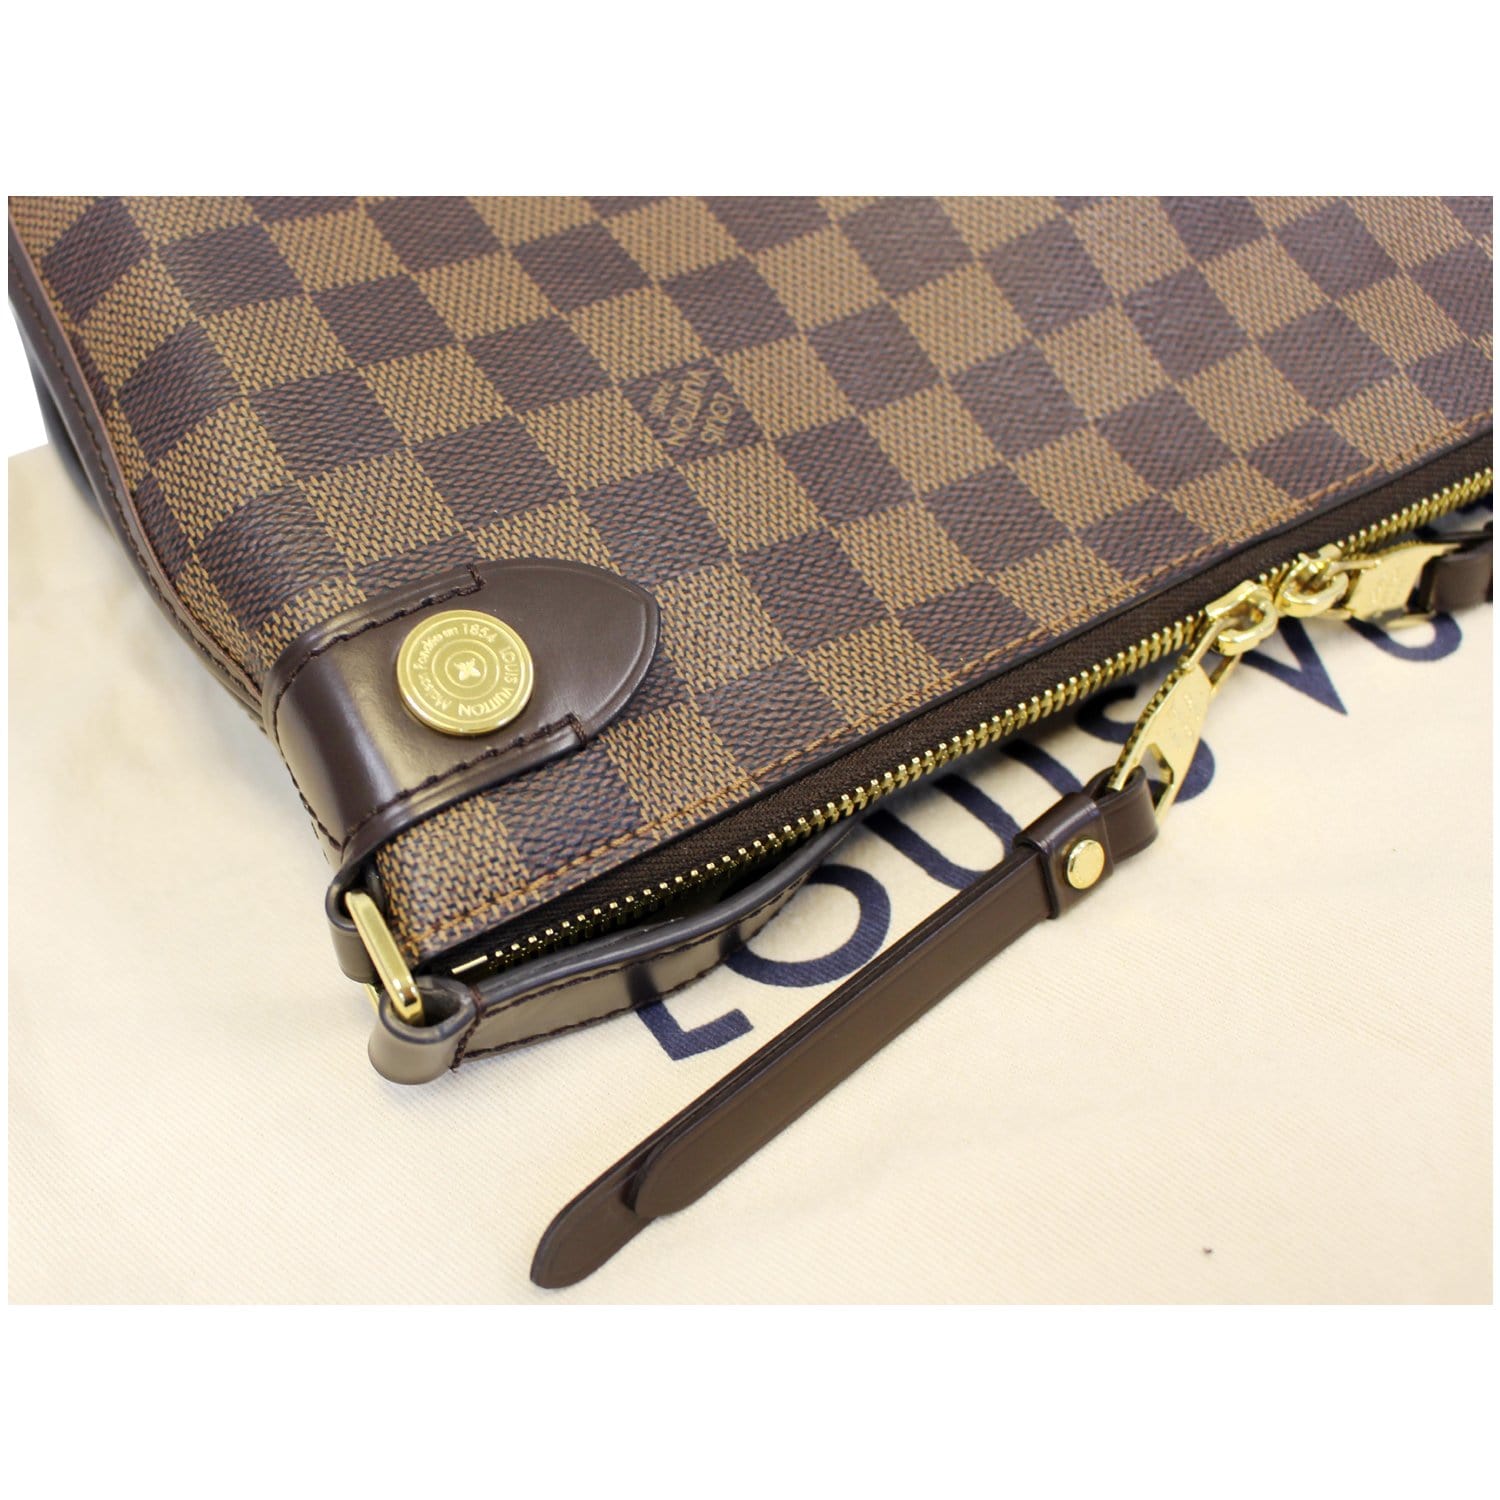 Just in! Louis Vuitton Duomo crossbody! Gorgeous with adjustable